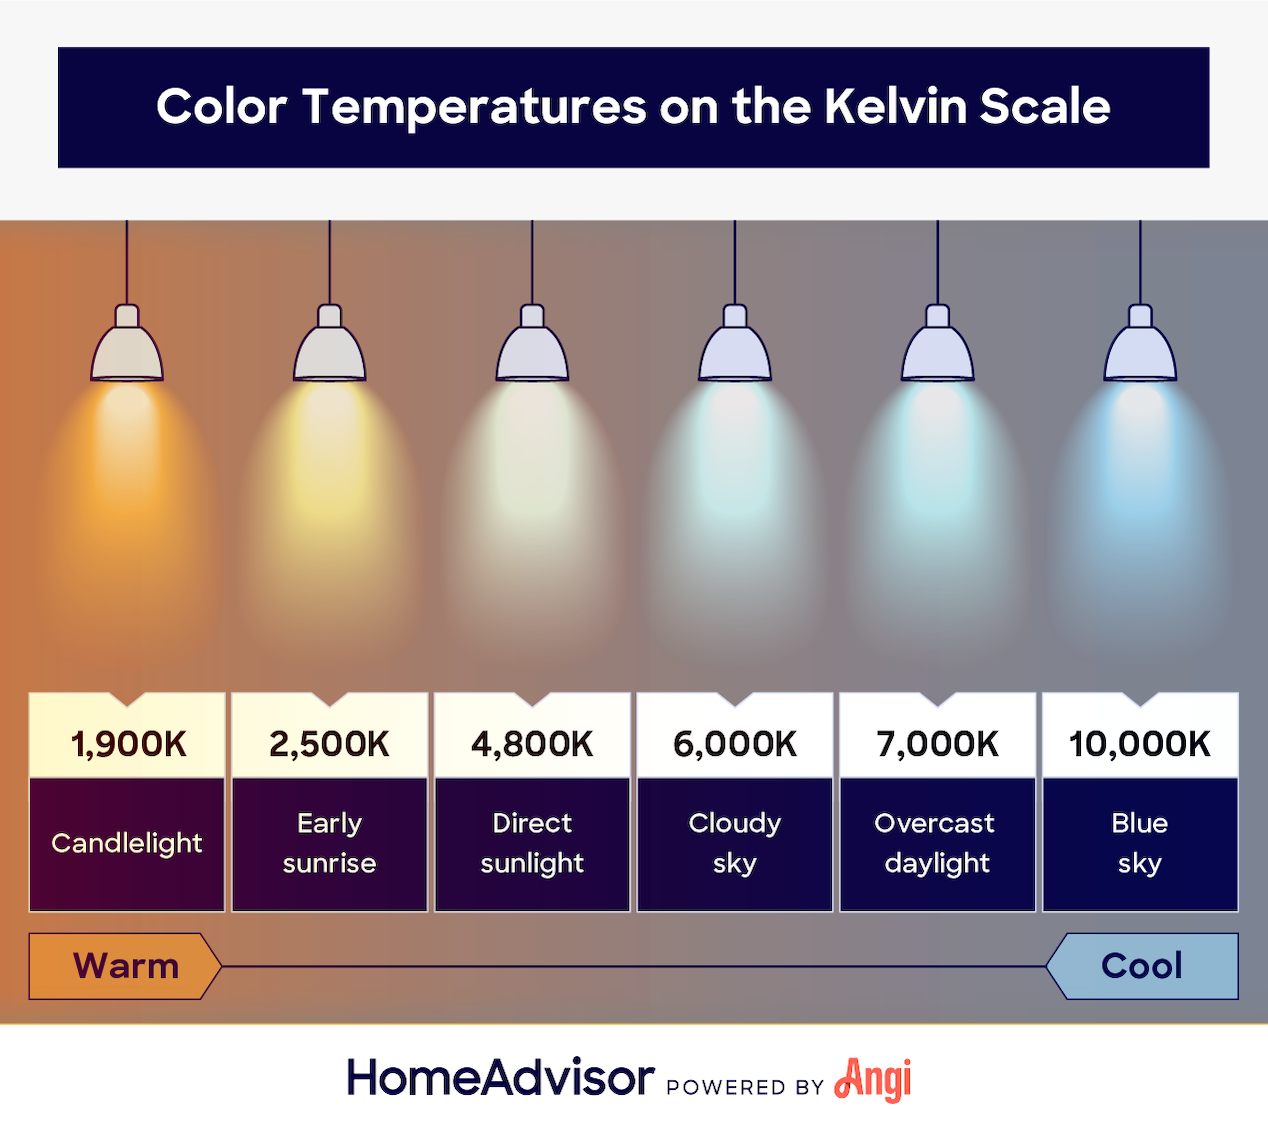 Color Temperatures on the Kelvin Scale